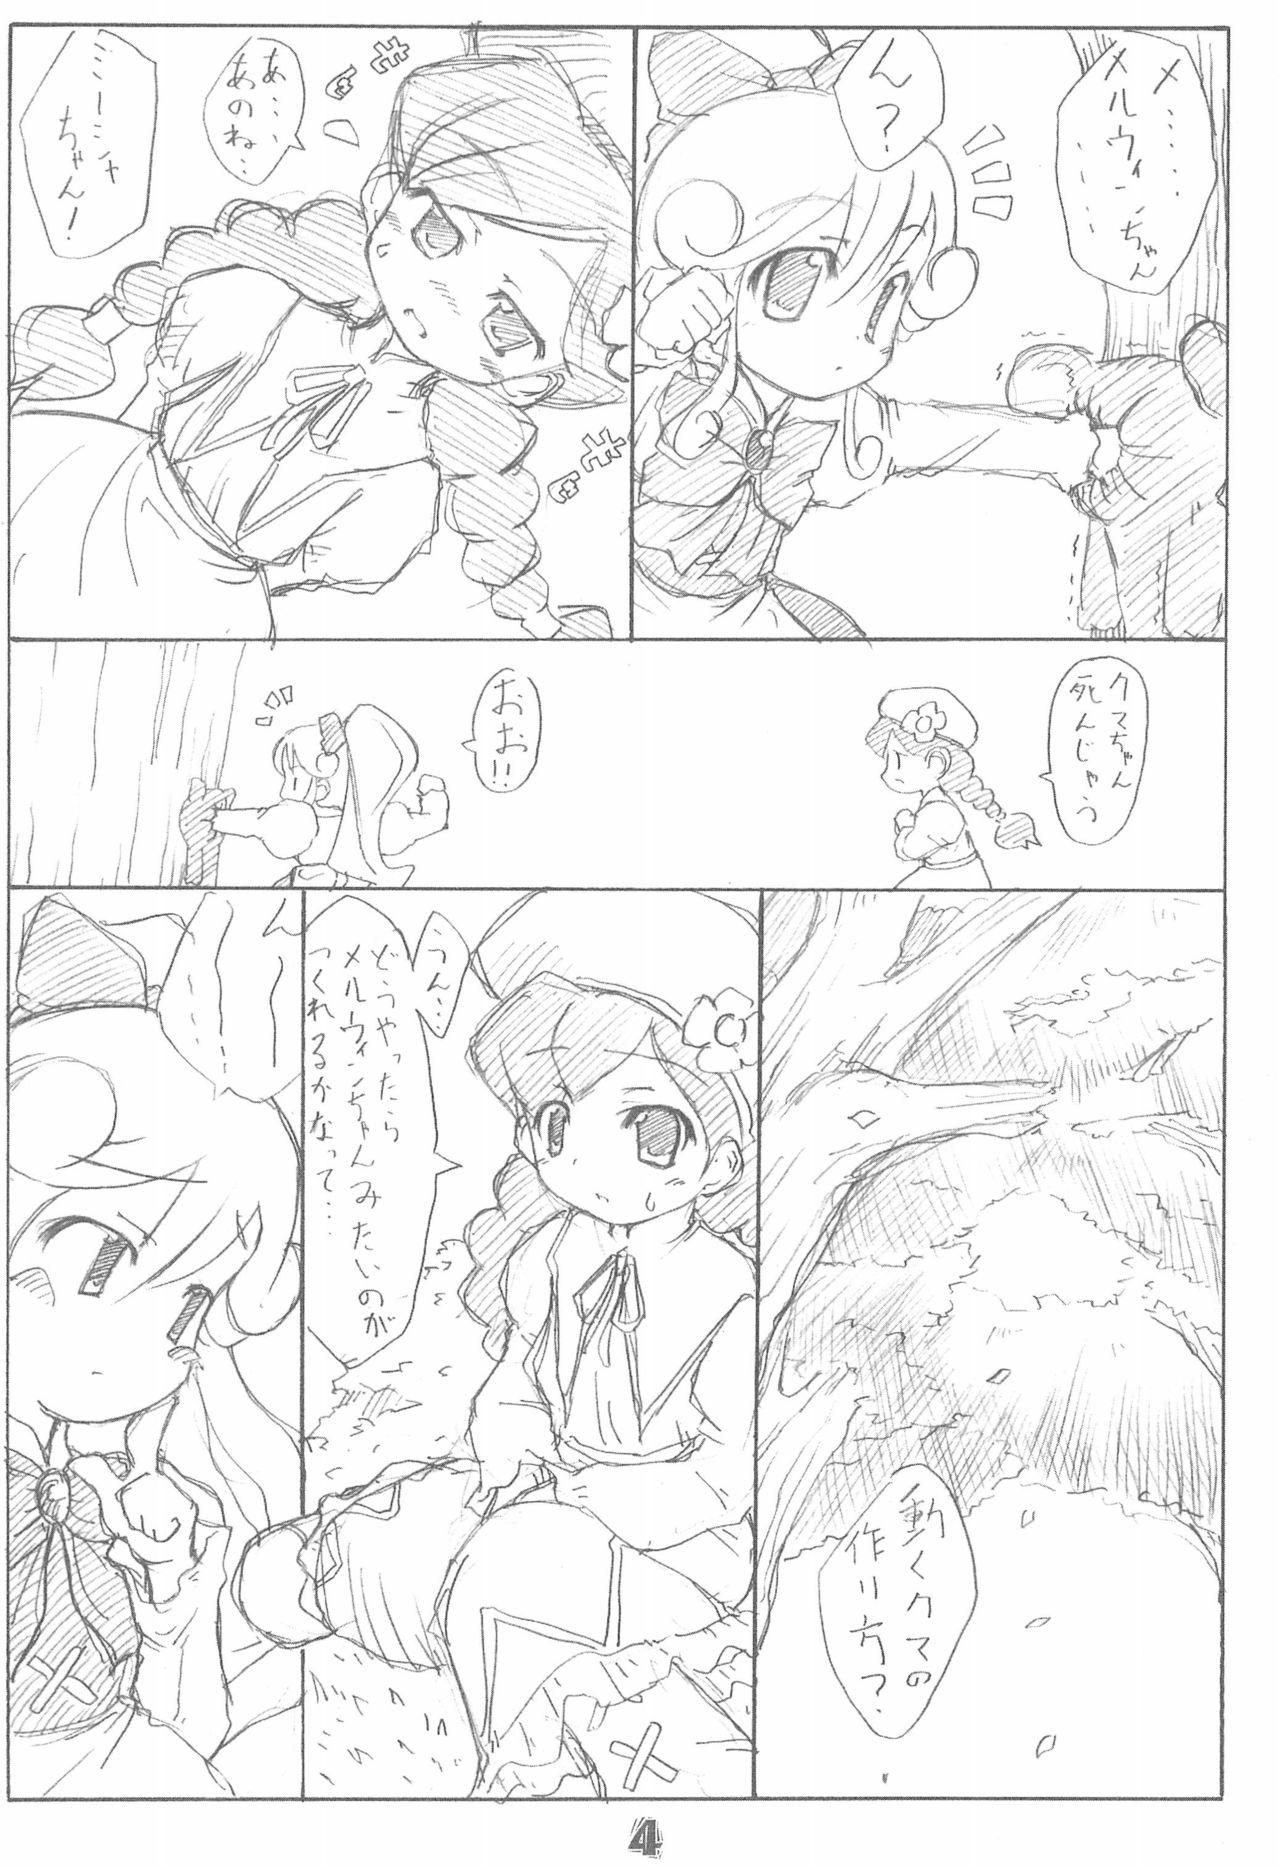 Macho In the land of Teddy and Girl - Original Passivo - Page 4